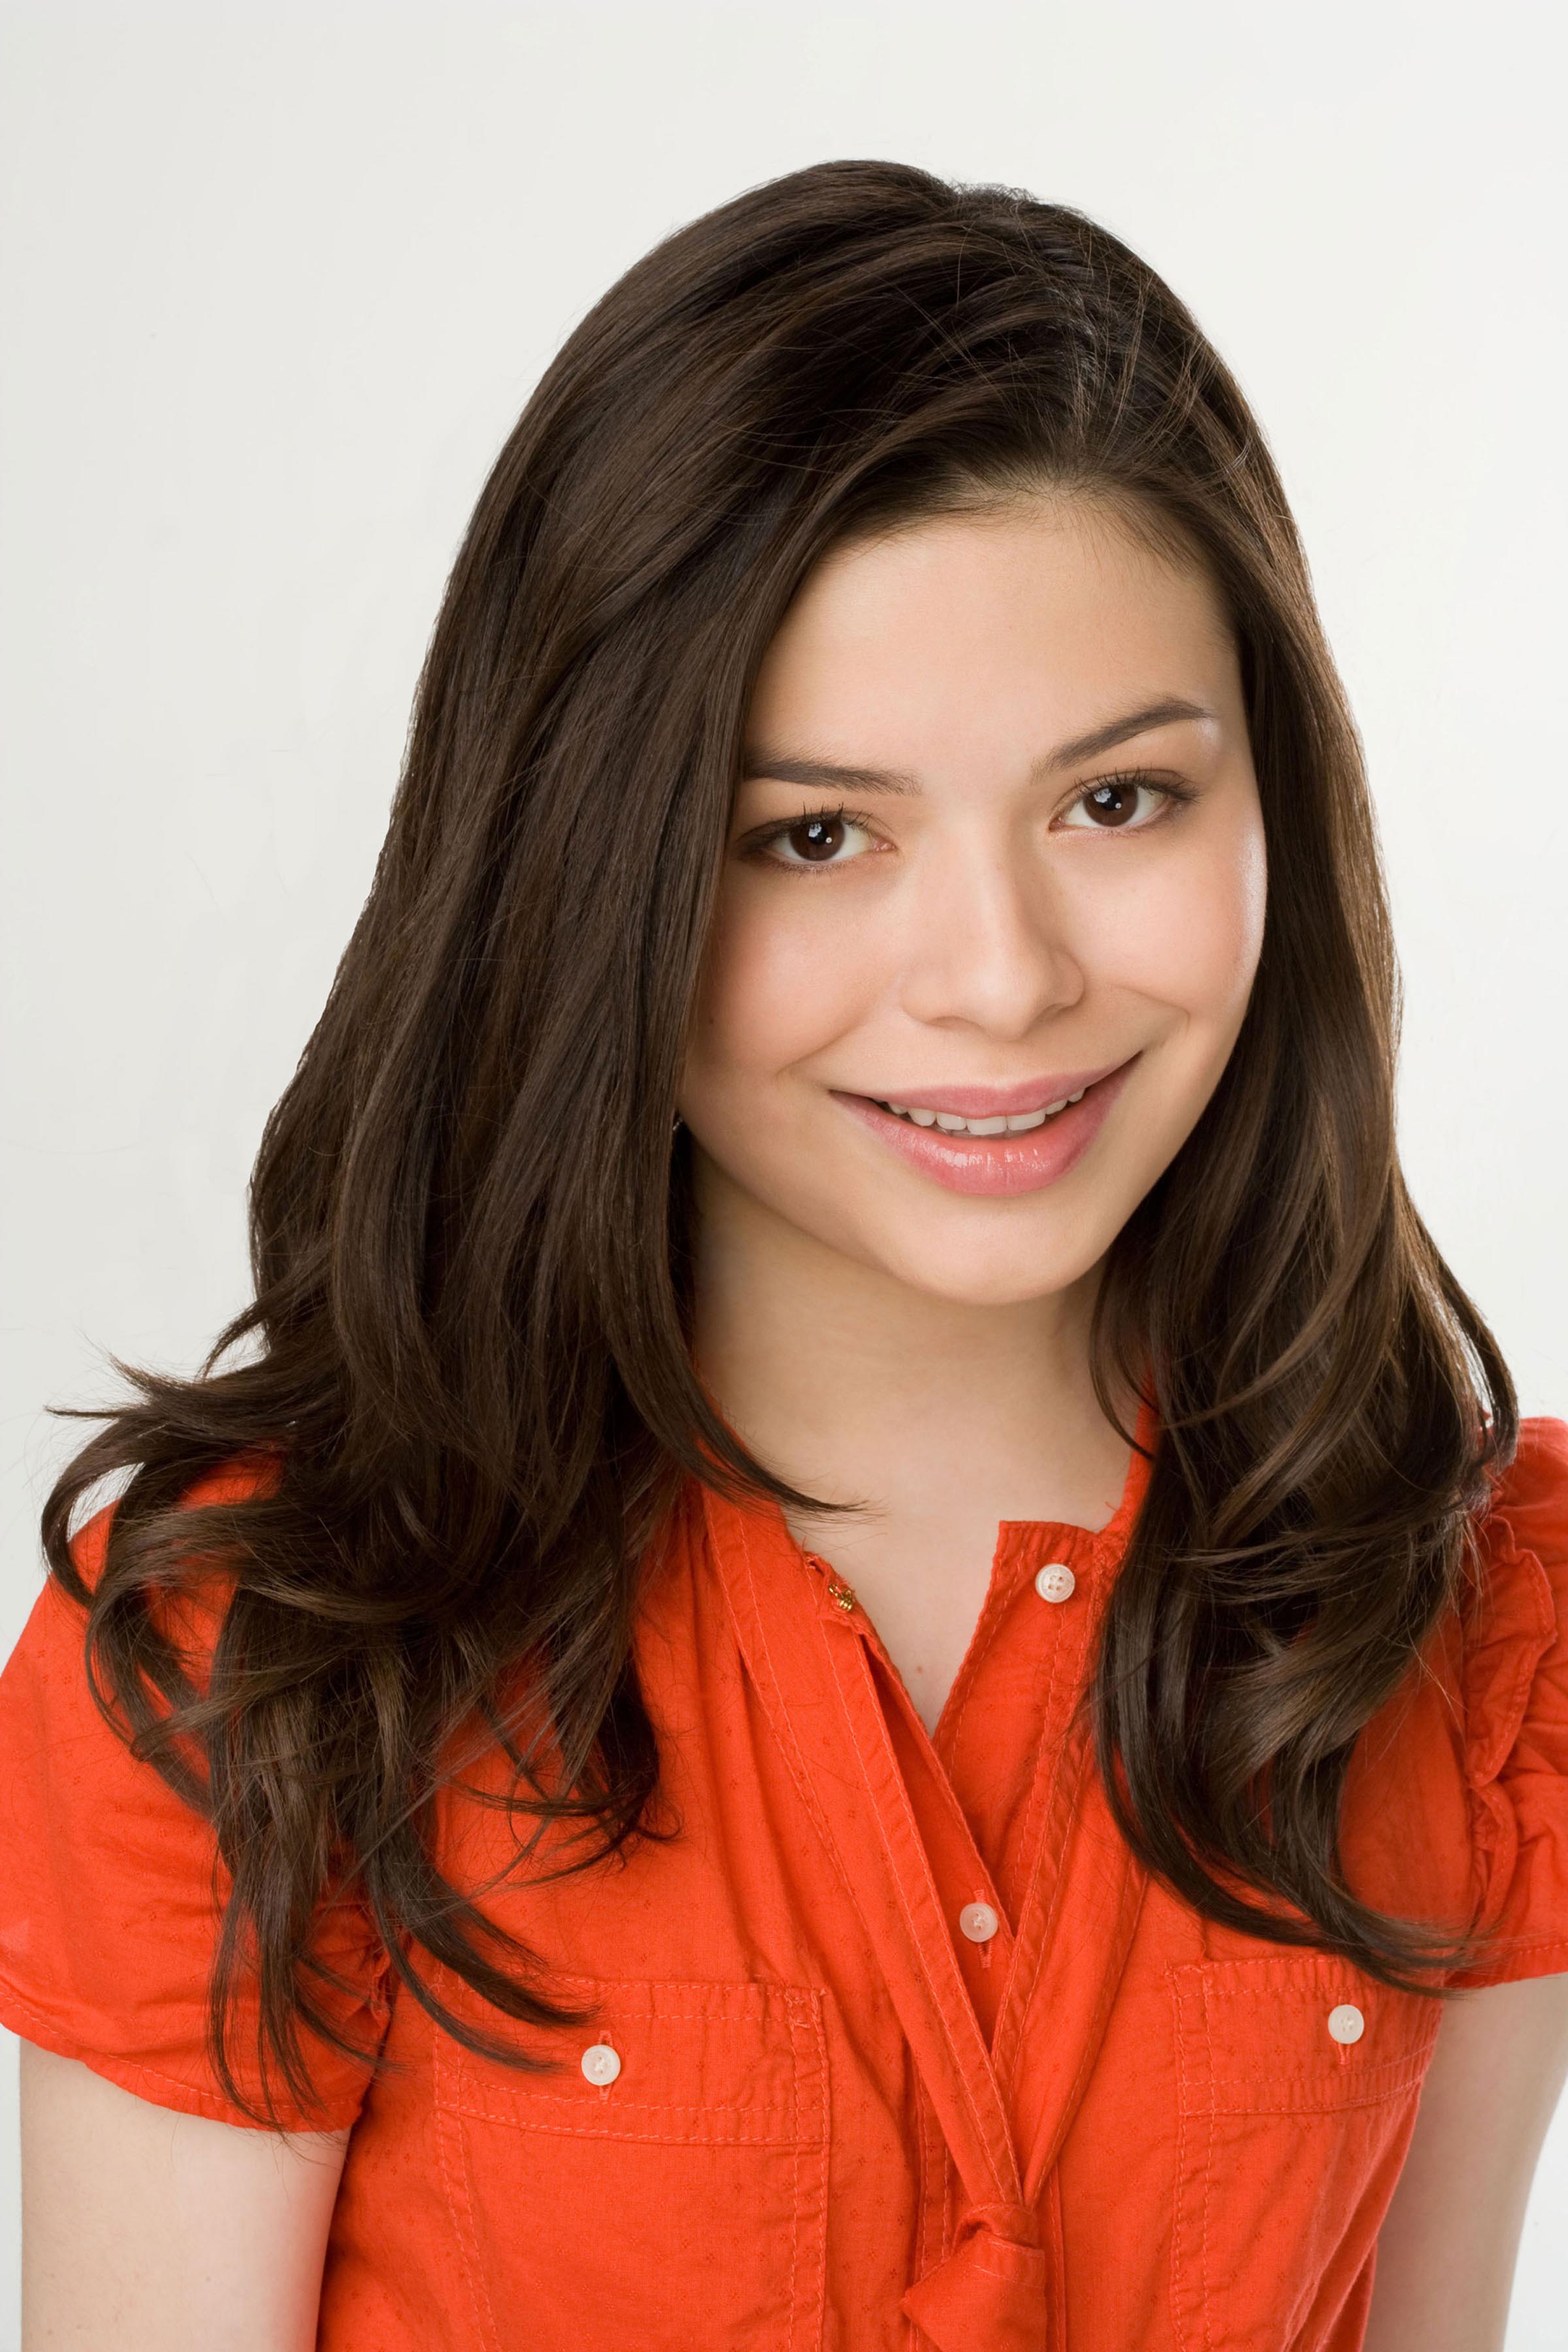 iCarly' reboot ordered by Paramount+ with original cast: reports